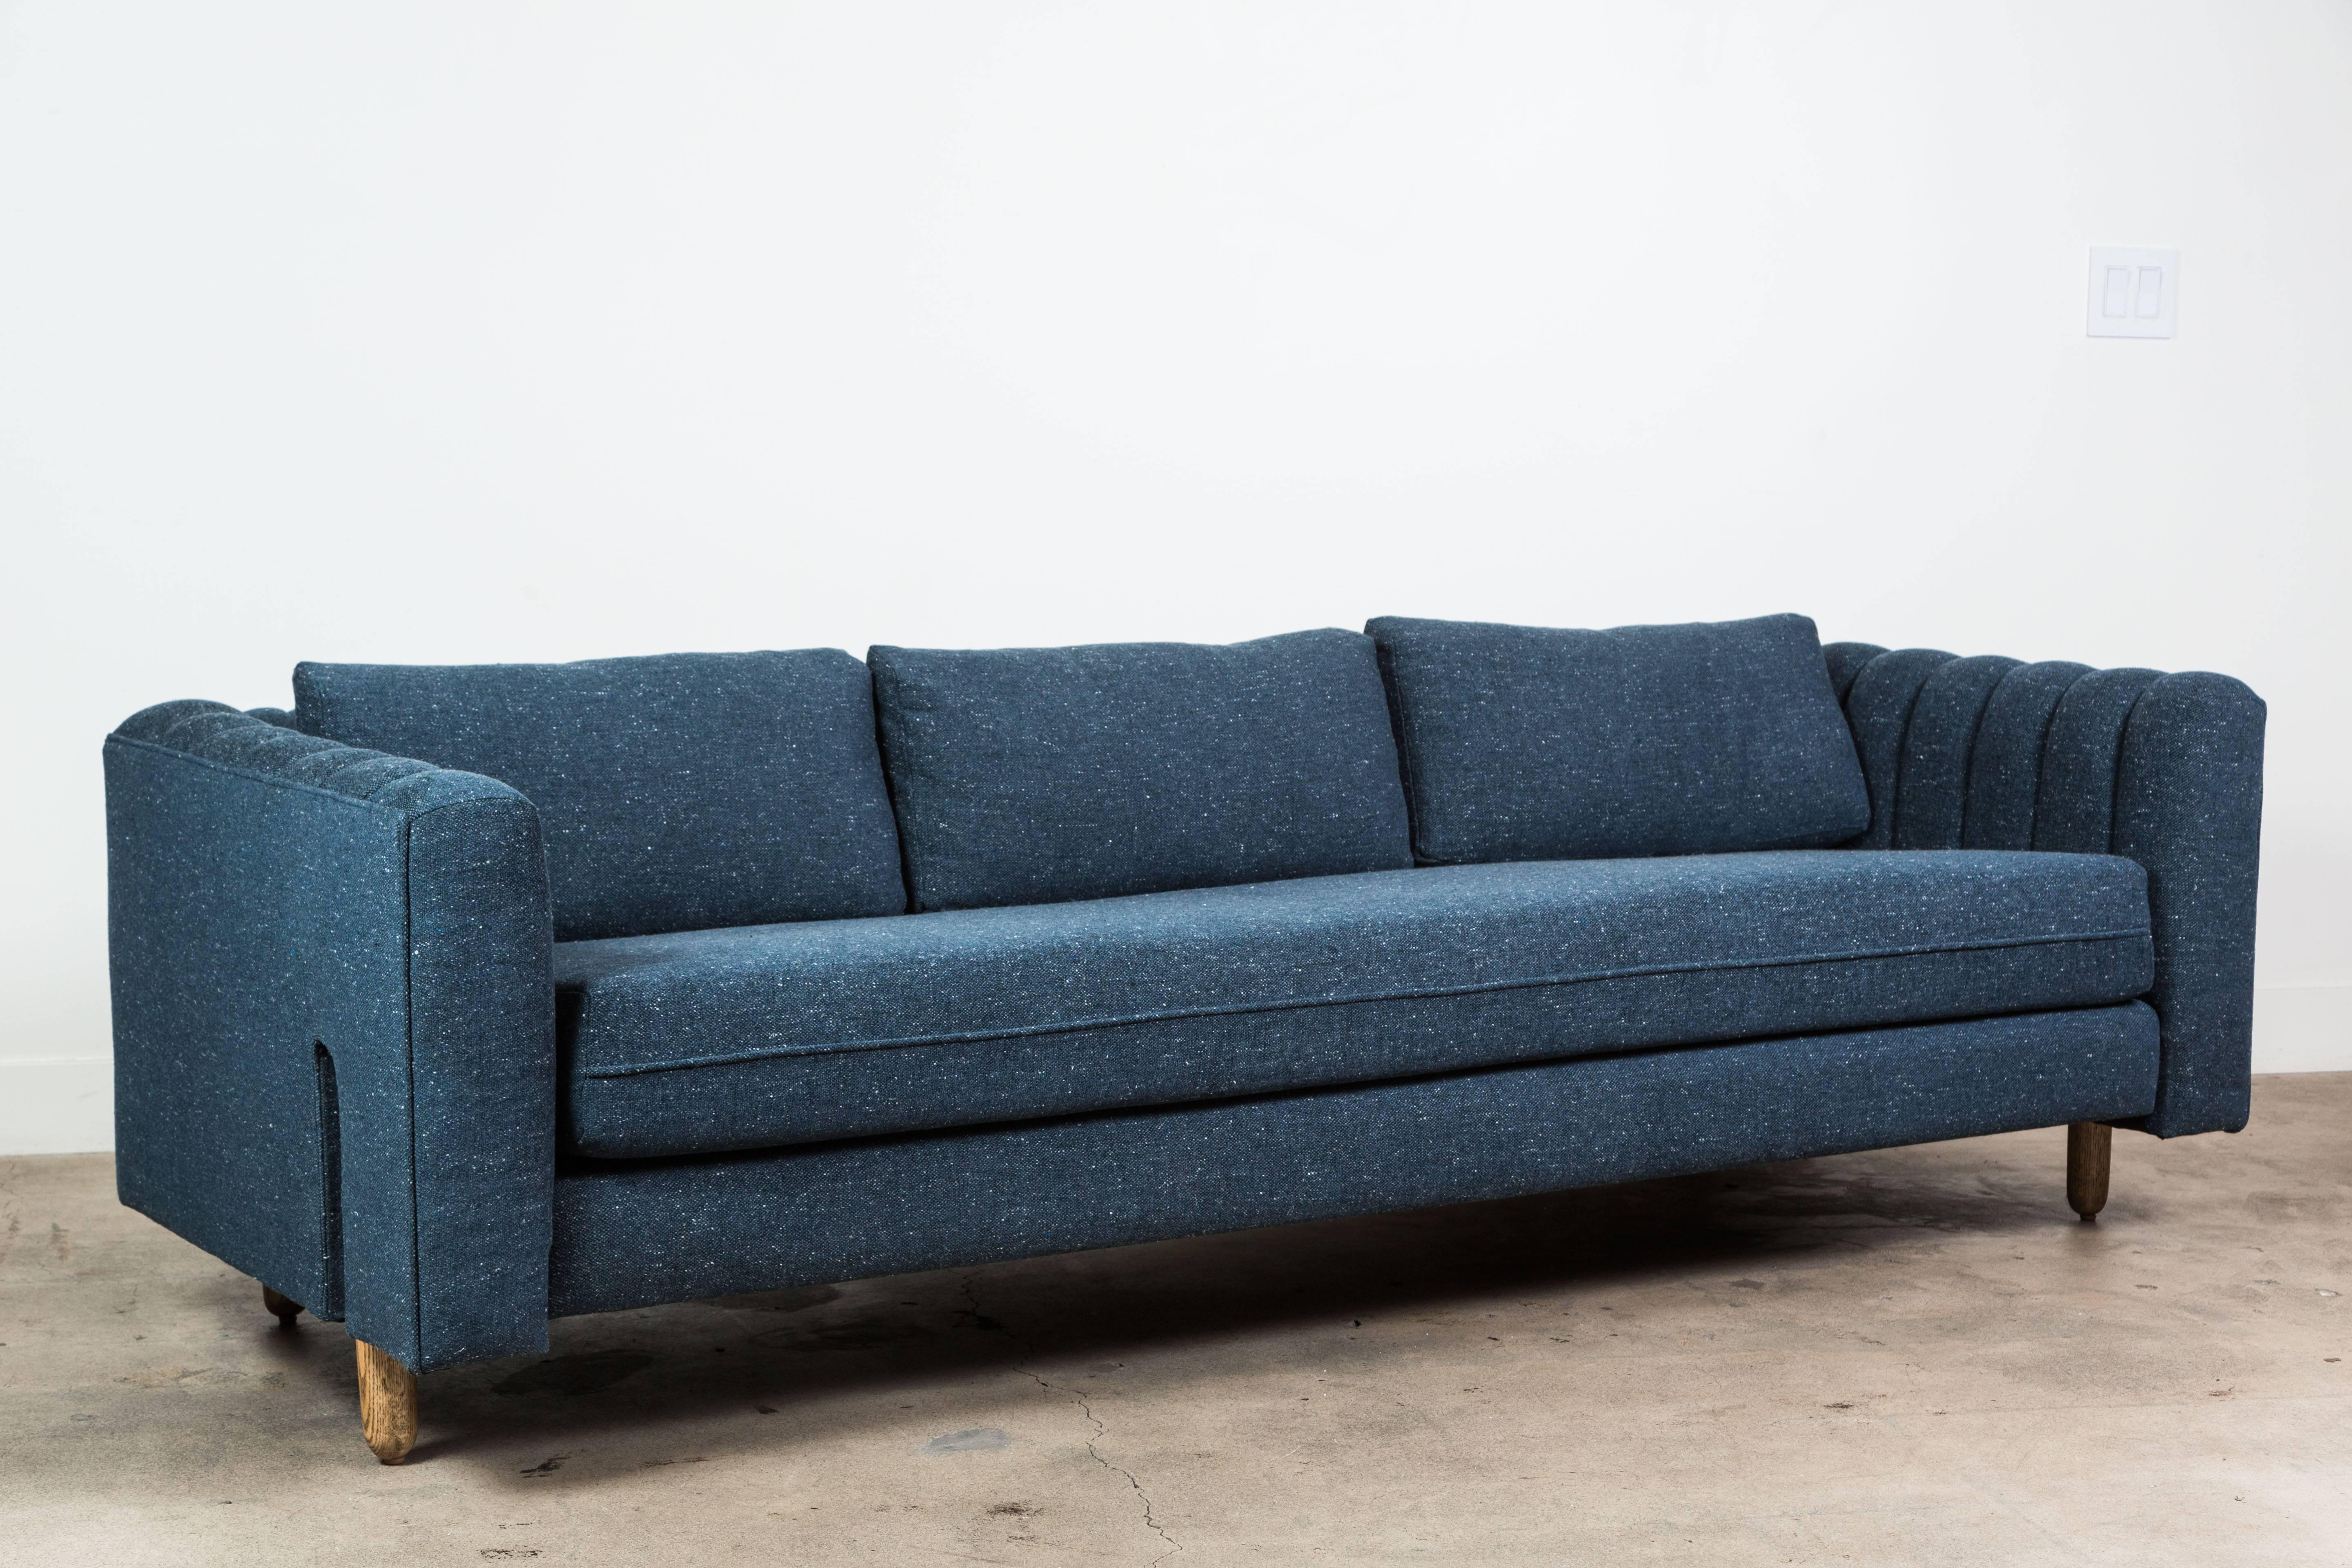 The Isherwood Sofa features a channel tufted body with loose bolster cushions. The turned legs are made of solid white oak or American walnut and are inset on the sides revealing the leg detail.

Available to order in customers own materials with a